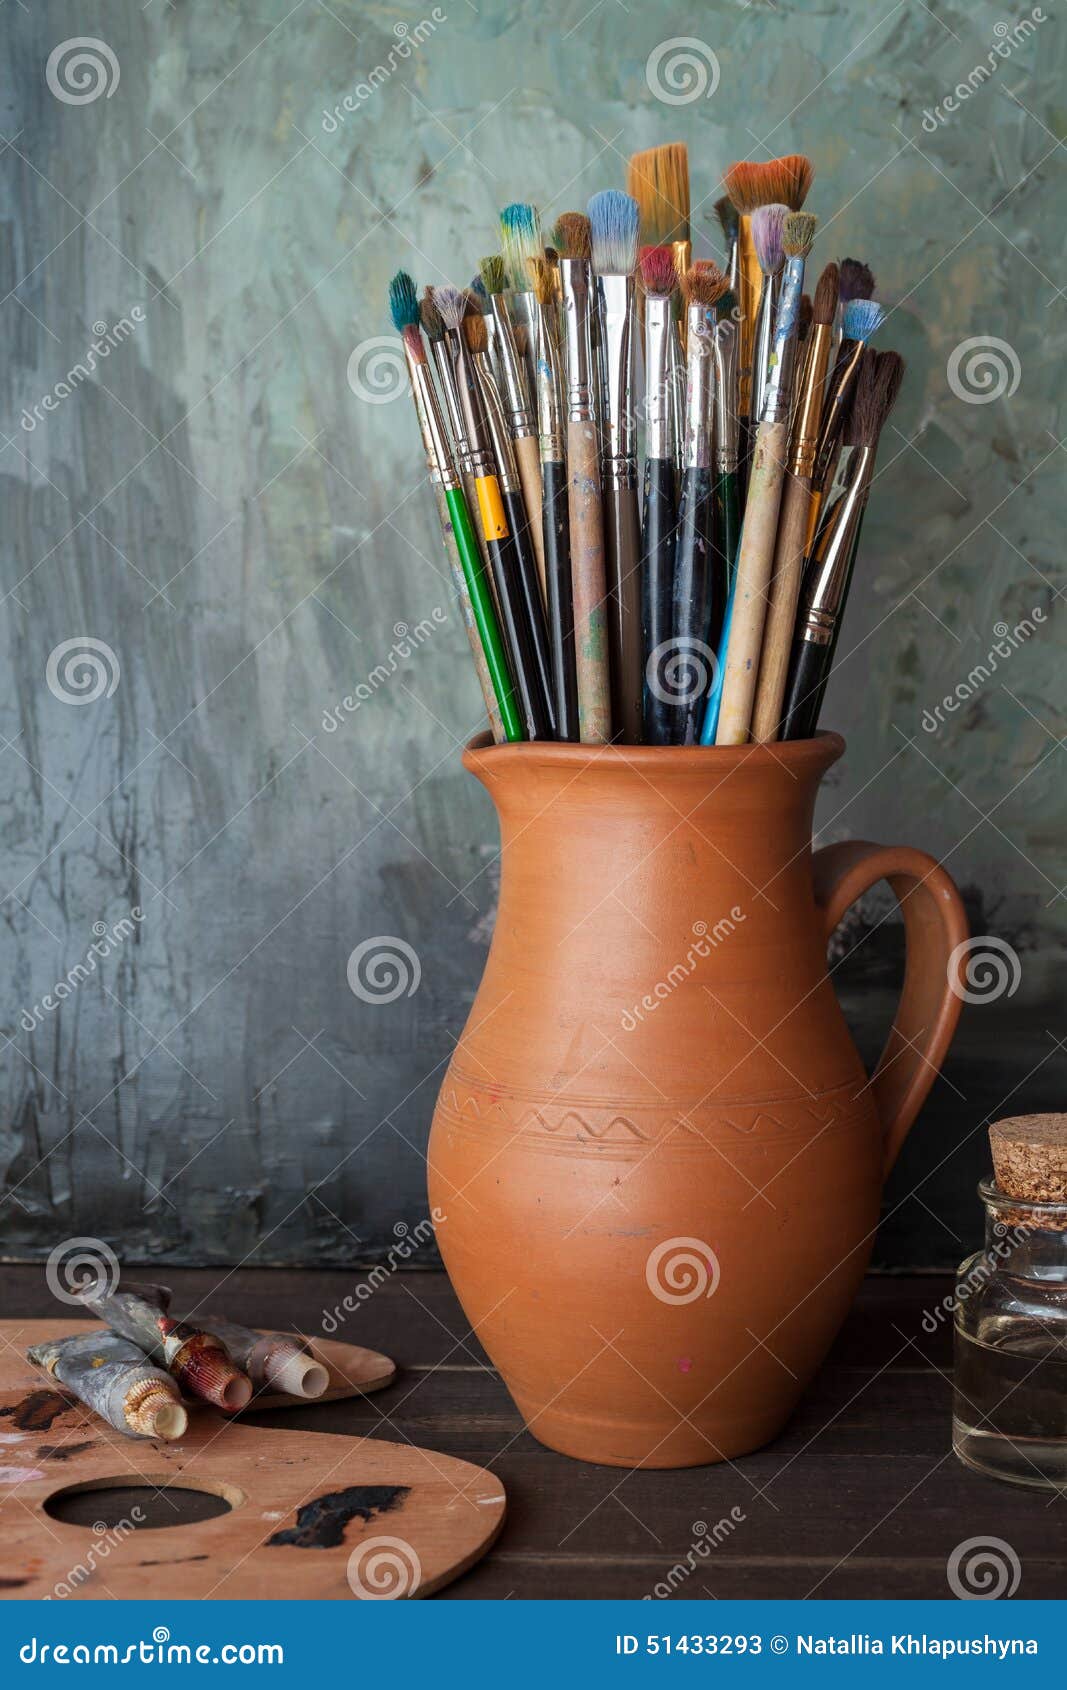 paintbrushes in a jug from potters clay, palette and paint tubes